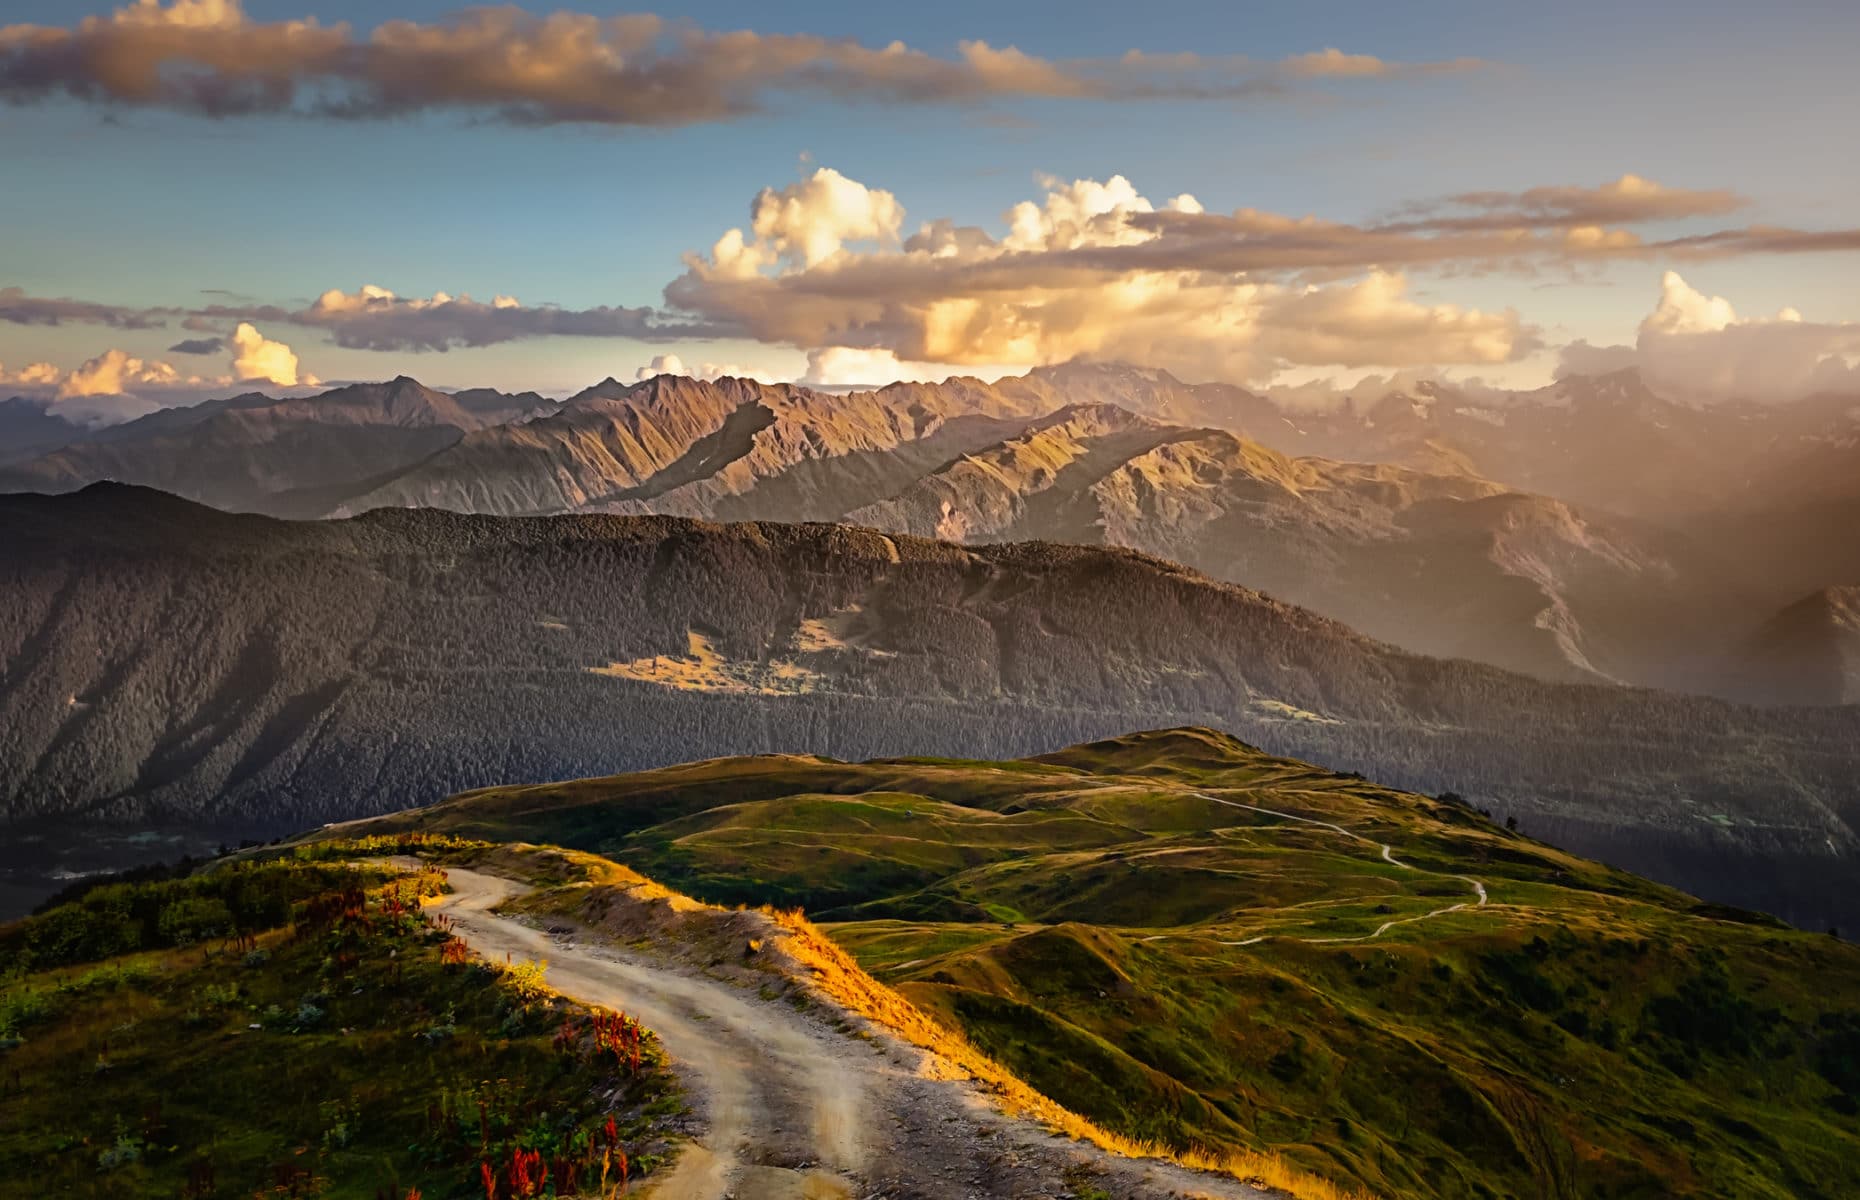 Beautiful mountain landscape view with road in foreground, Svane